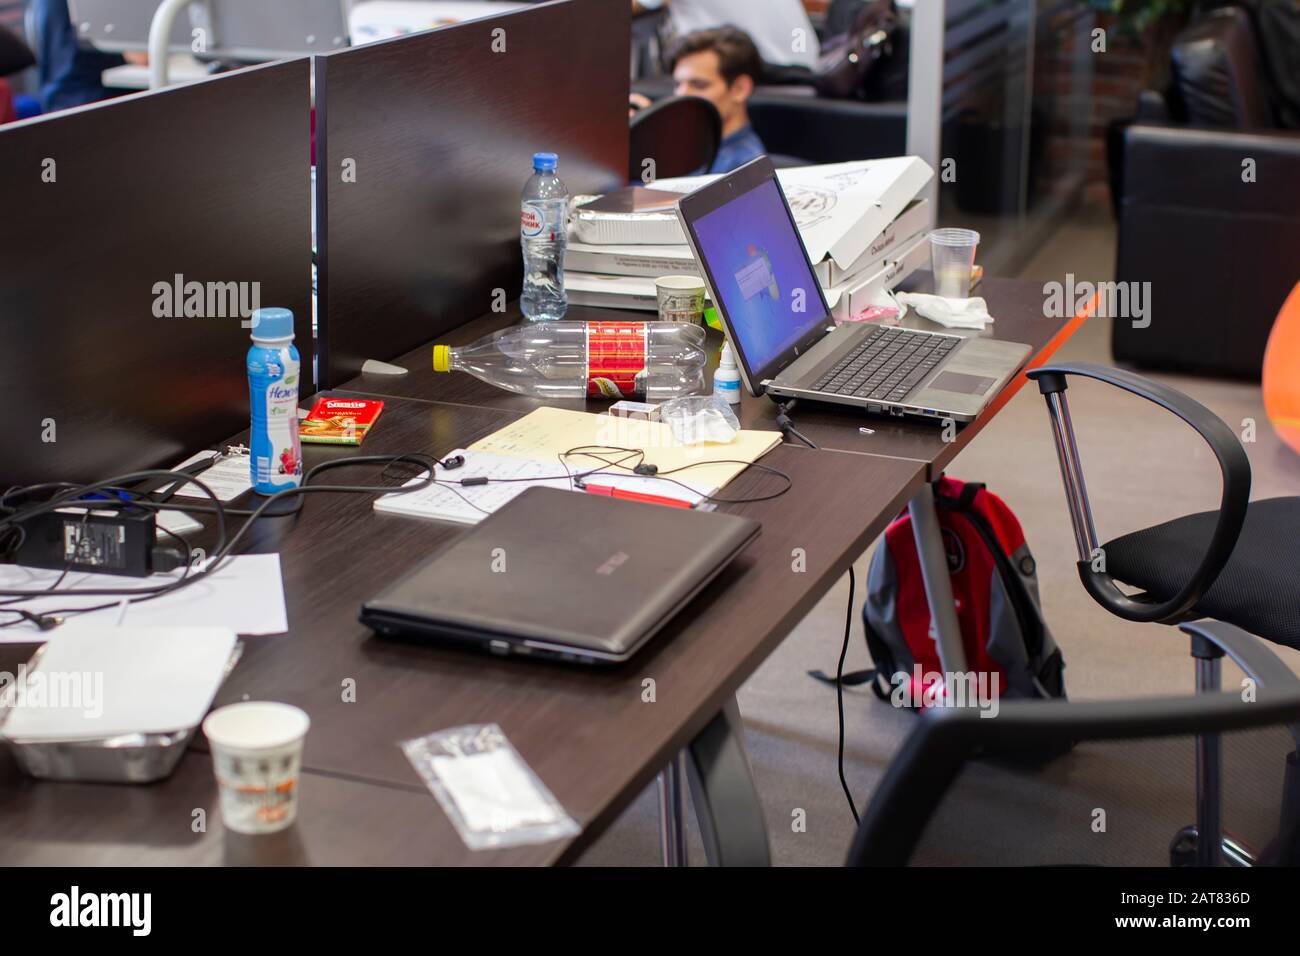 Belarus, the city of Minsk. Programmers Office. Workplace of the programmer.Office desk with laptops cups, leftover food. Stock Photo